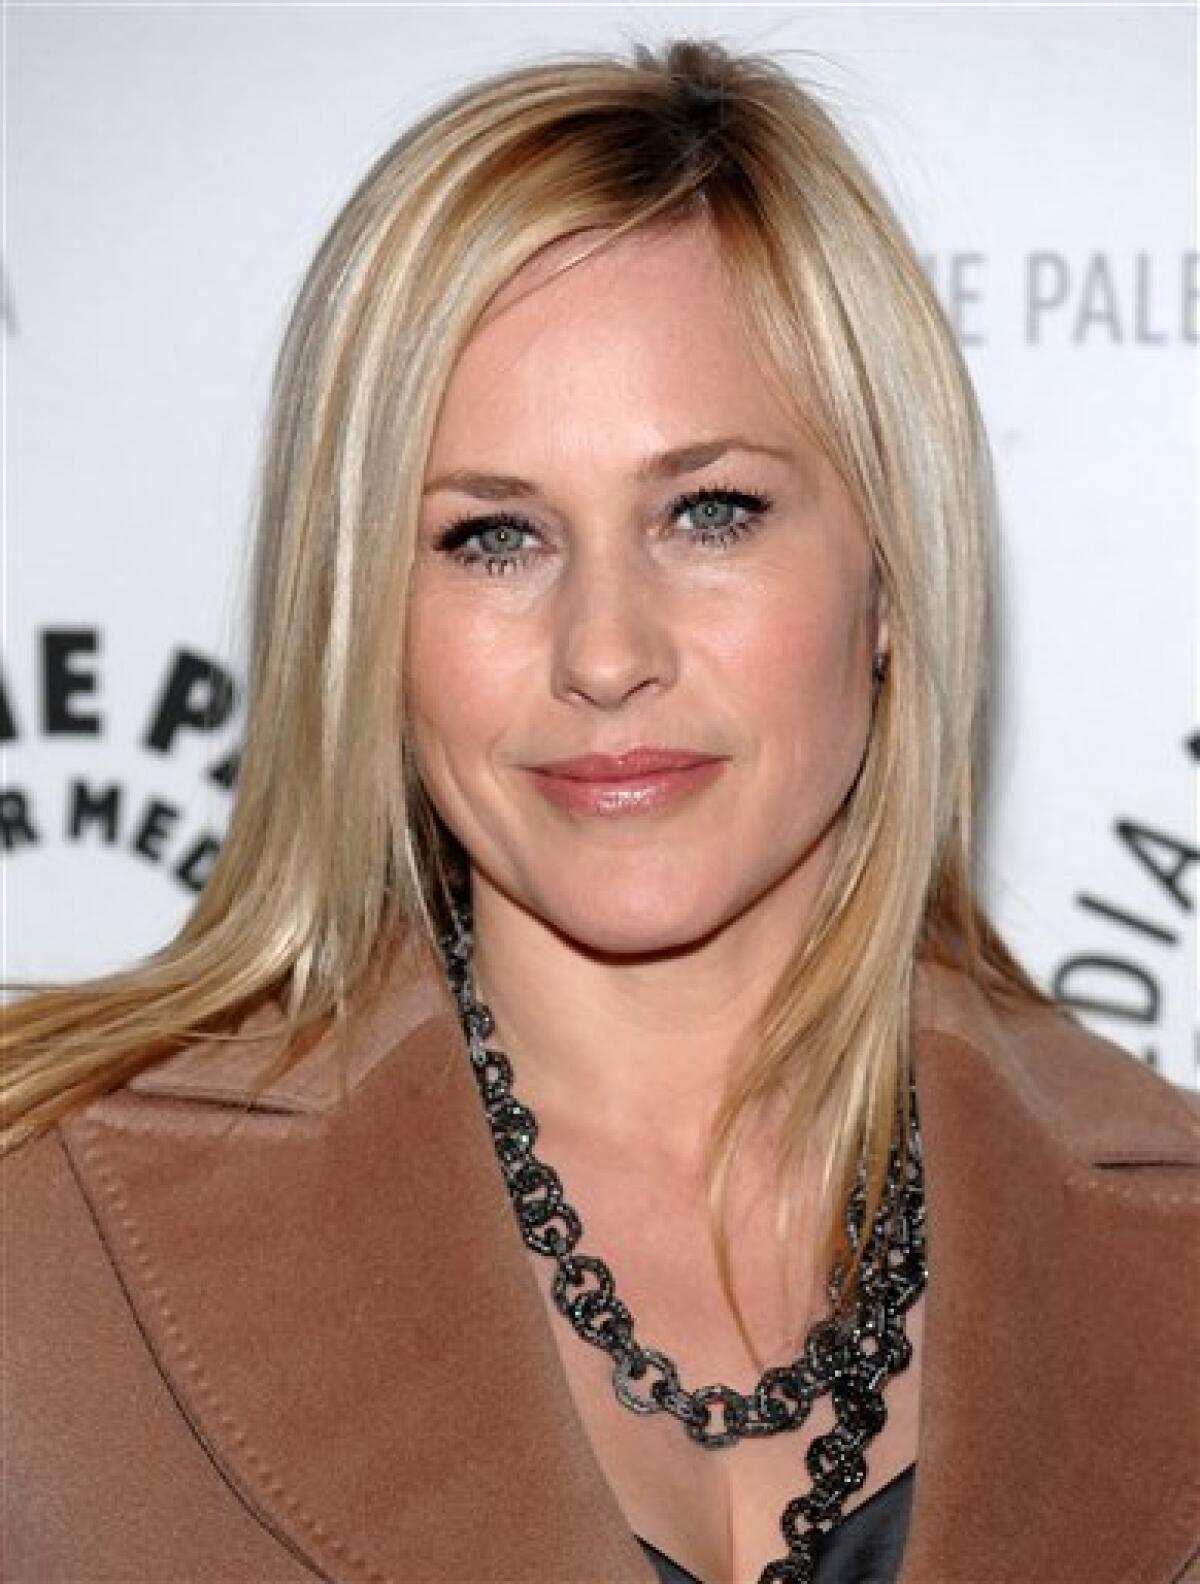 FILE - In this Feb. 12, 2009 file photo, Actress Patricia Arquette arrives at a presentation of her directorial debut of an upcoming episode of 'Medium' at The Paley Center for Media in New York. (AP Photo/Evan Agostini, File)